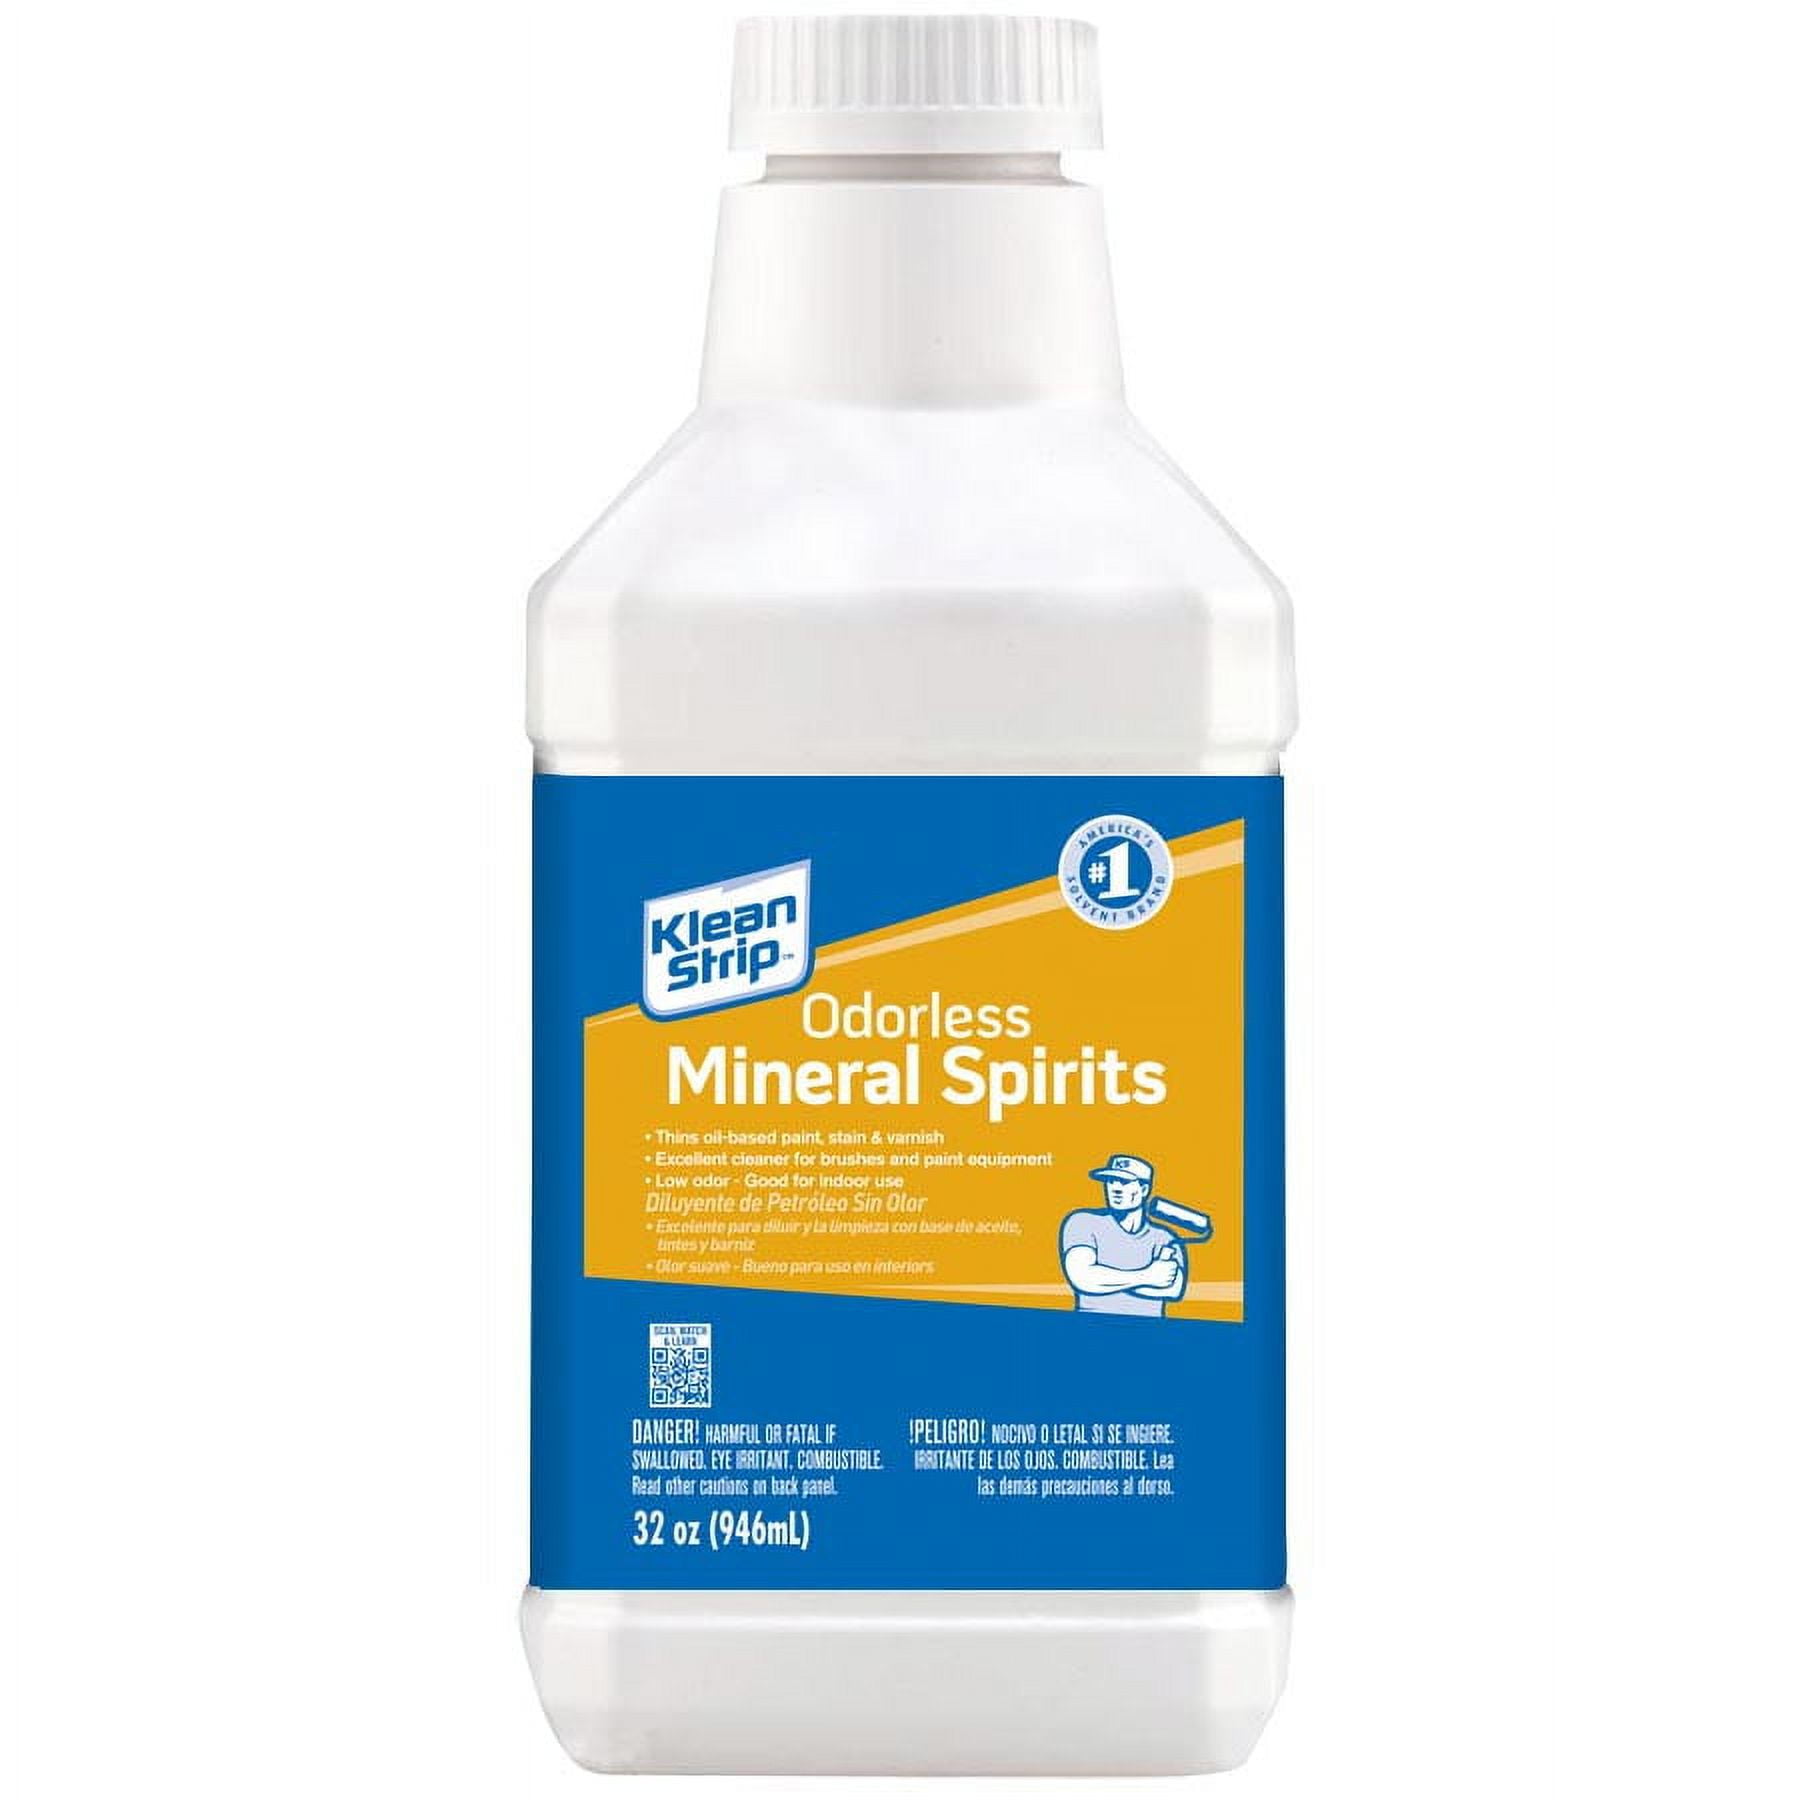 Top Mineral Spirits Uses In Your Home